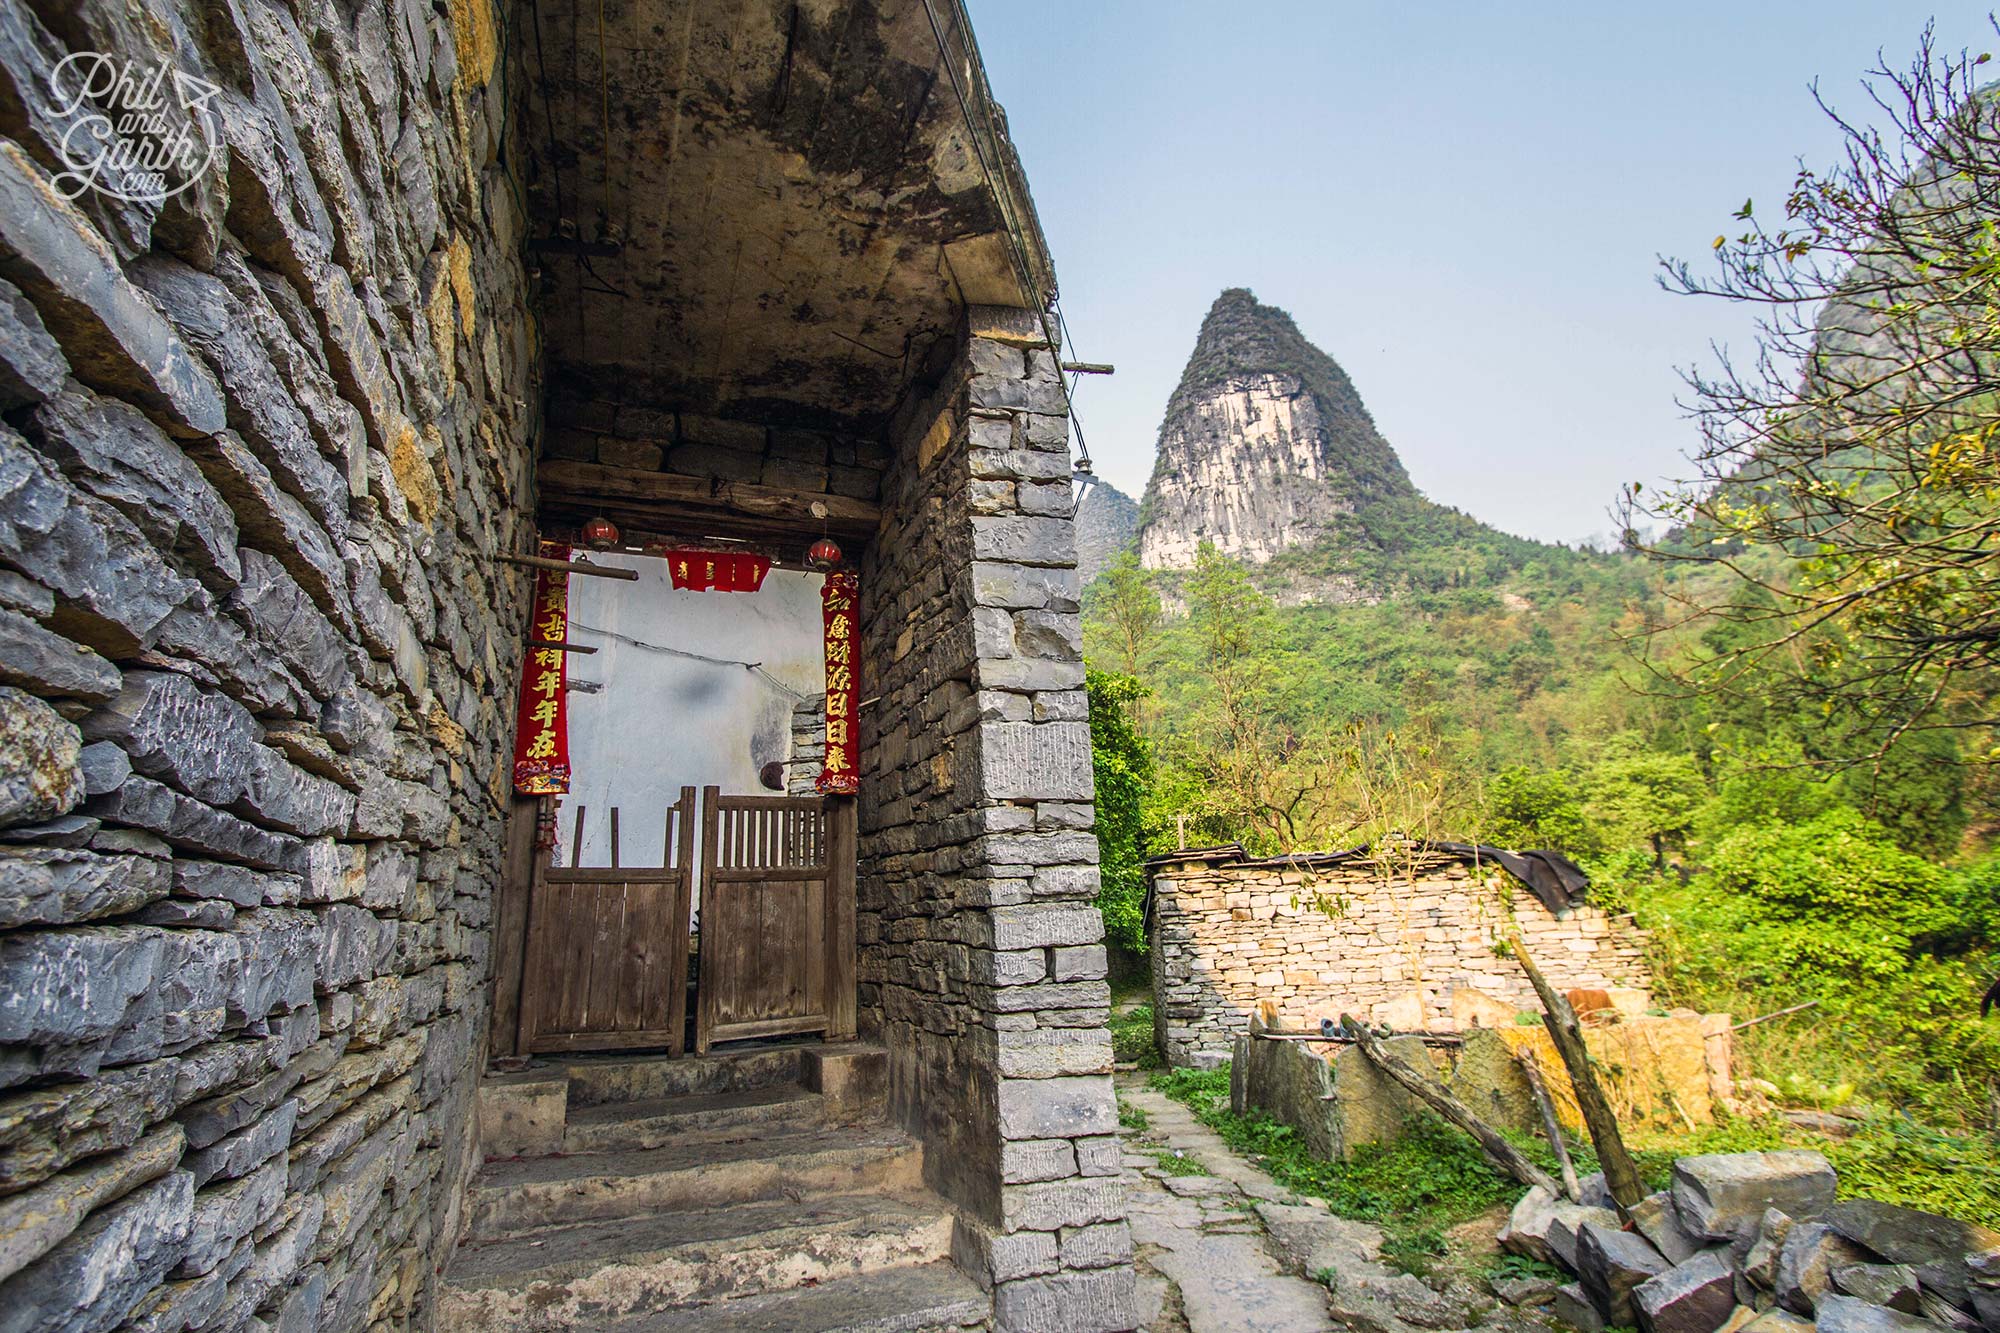 An old stone building in rural Yangshuo